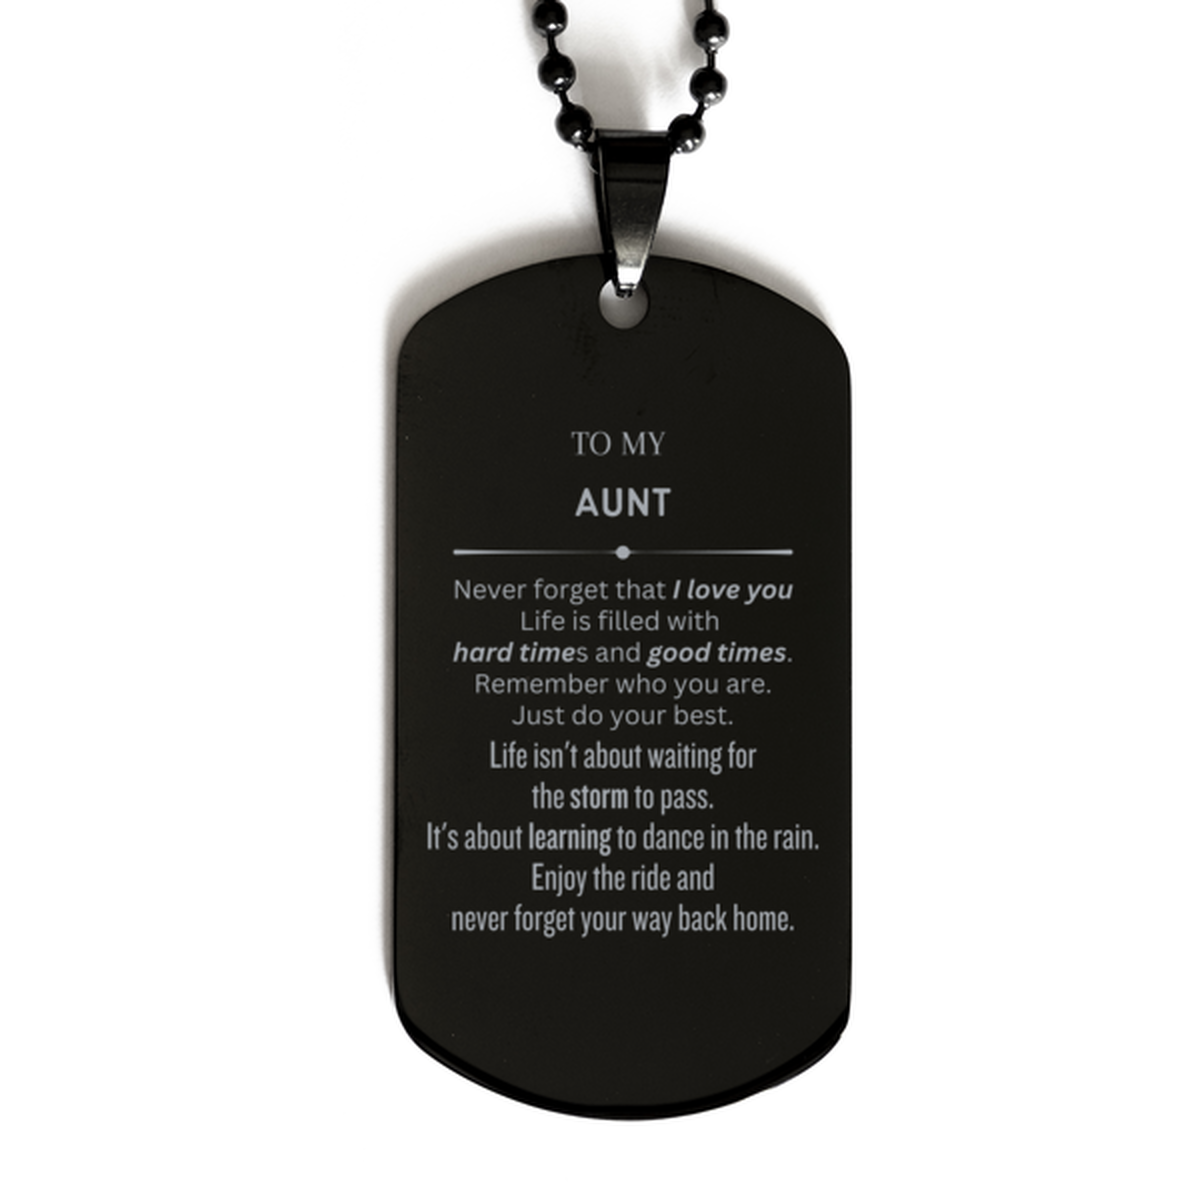 Christmas Aunt Black Dog Tag Gifts, To My Aunt Birthday Thank You Gifts For Aunt, Graduation Unique Gifts For Aunt To My Aunt Never forget that I love you life is filled with hard times and good times. Remember who you are. Just do your best